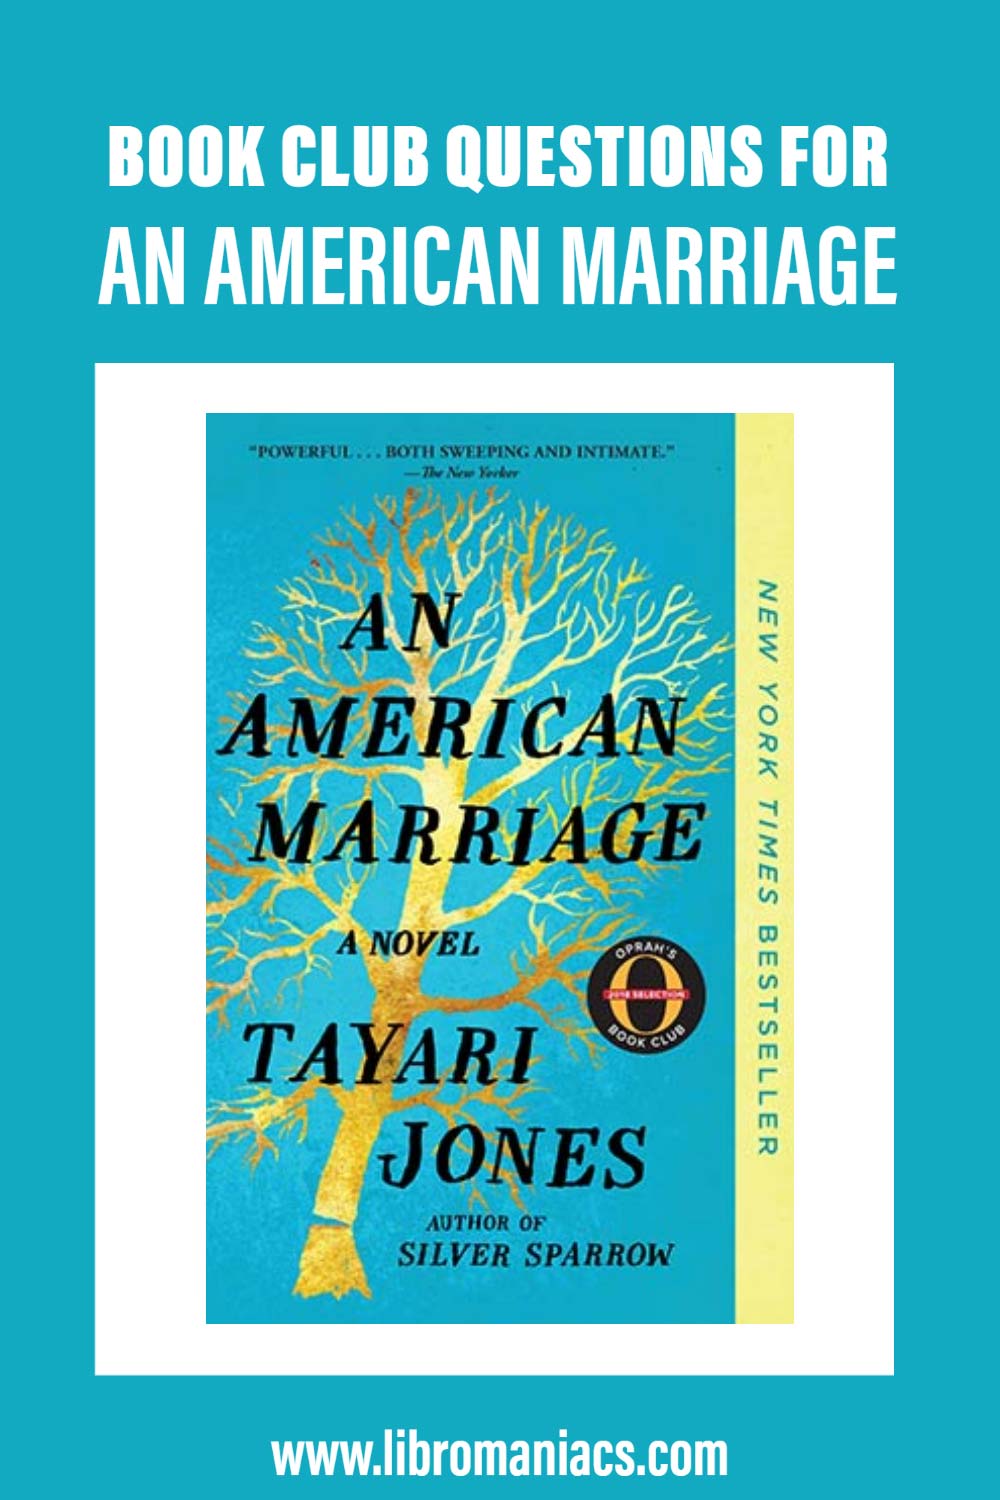 Book Club Questions for An American Marriage